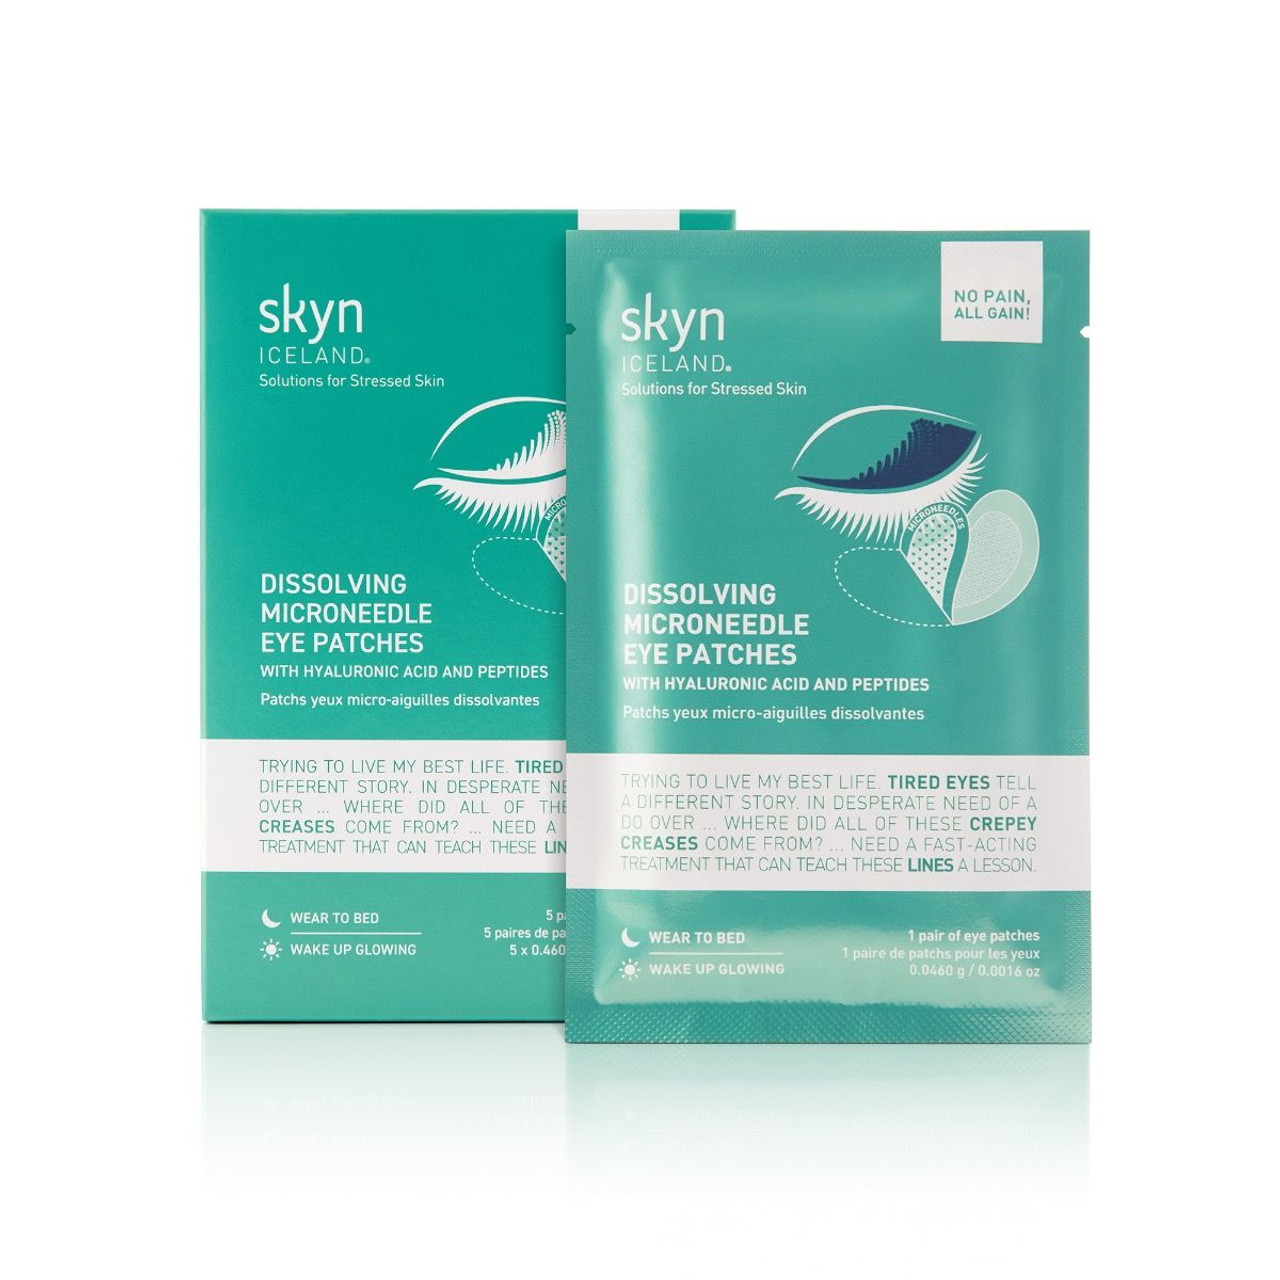 skyn ICELAND - Dissolving Microneedle Eye Patches (5 Pairs) - Beauty Bridge